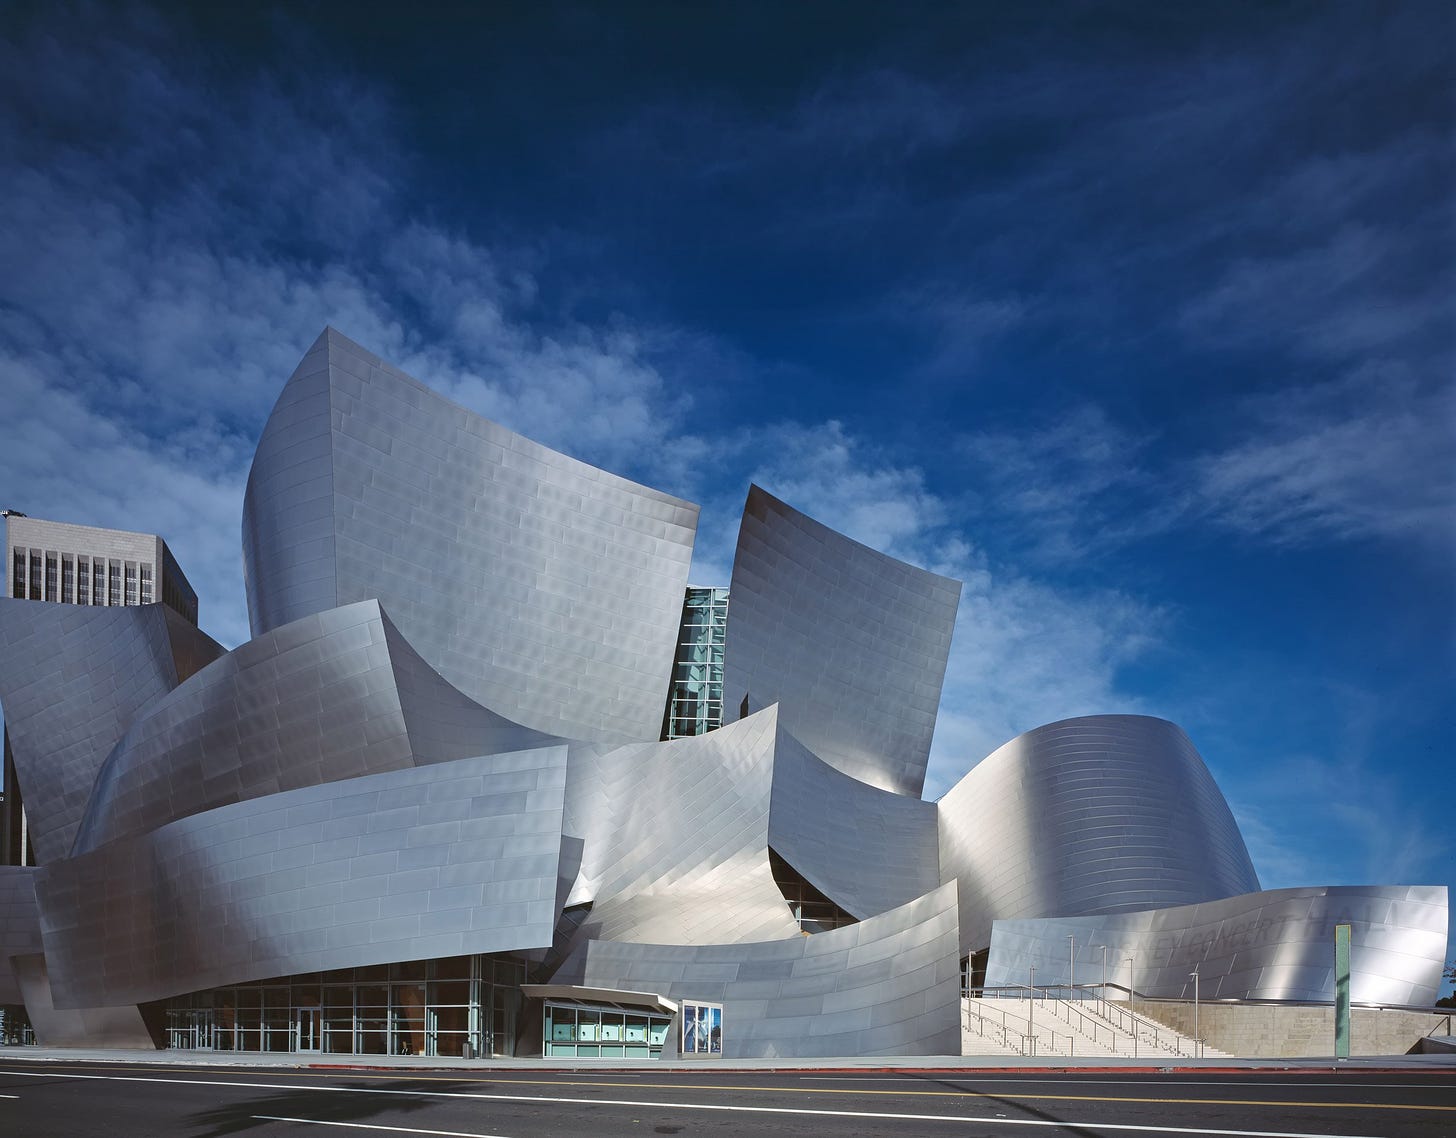 Frank Gehry's Walt Disney Concert Hall is "a living room" for Los Angeles